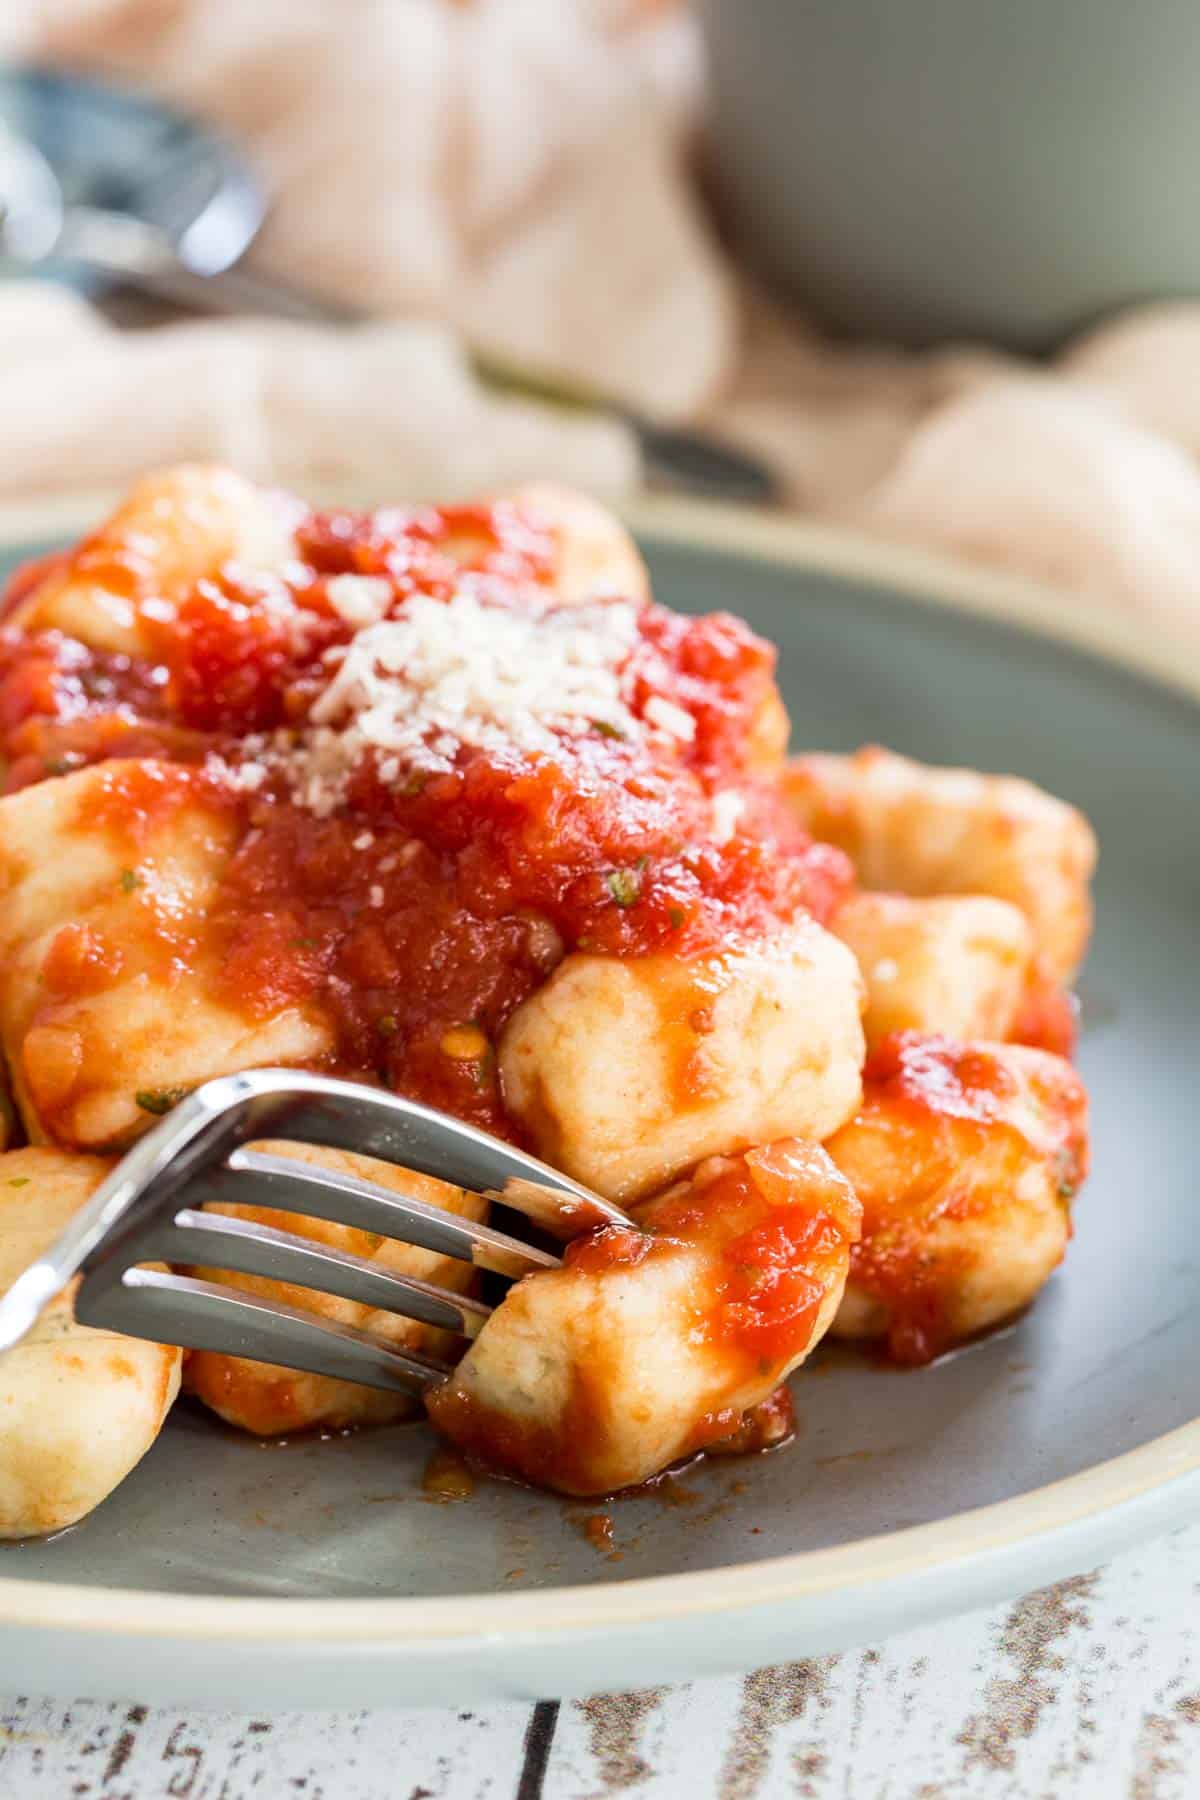 Gnocchi in tomato sauce on a plate, with a fork.